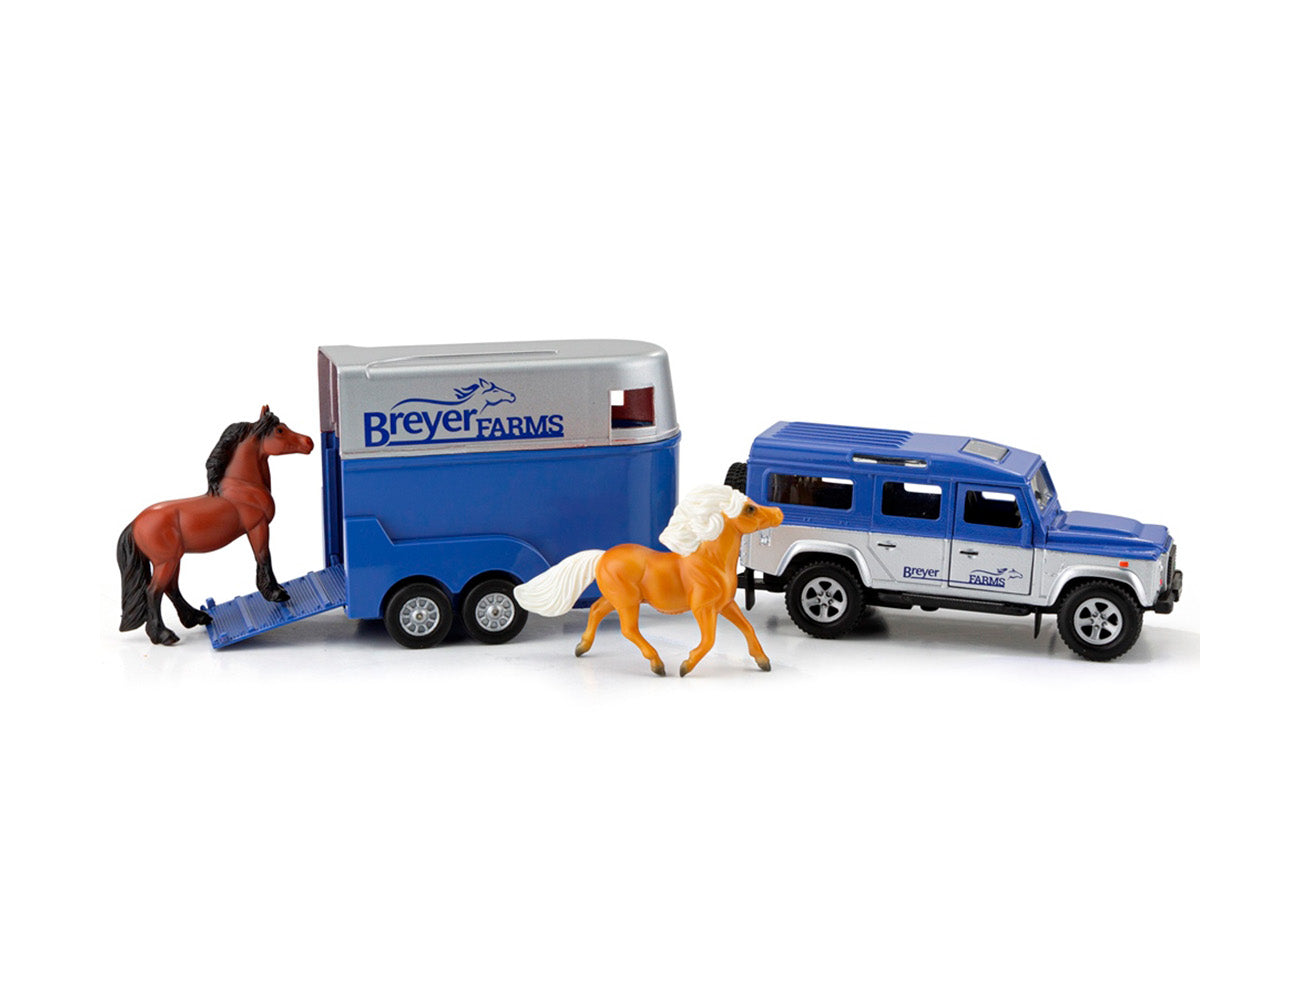 Breyer Stablemates Farms Land Rover & Tag-A-Long Trailer